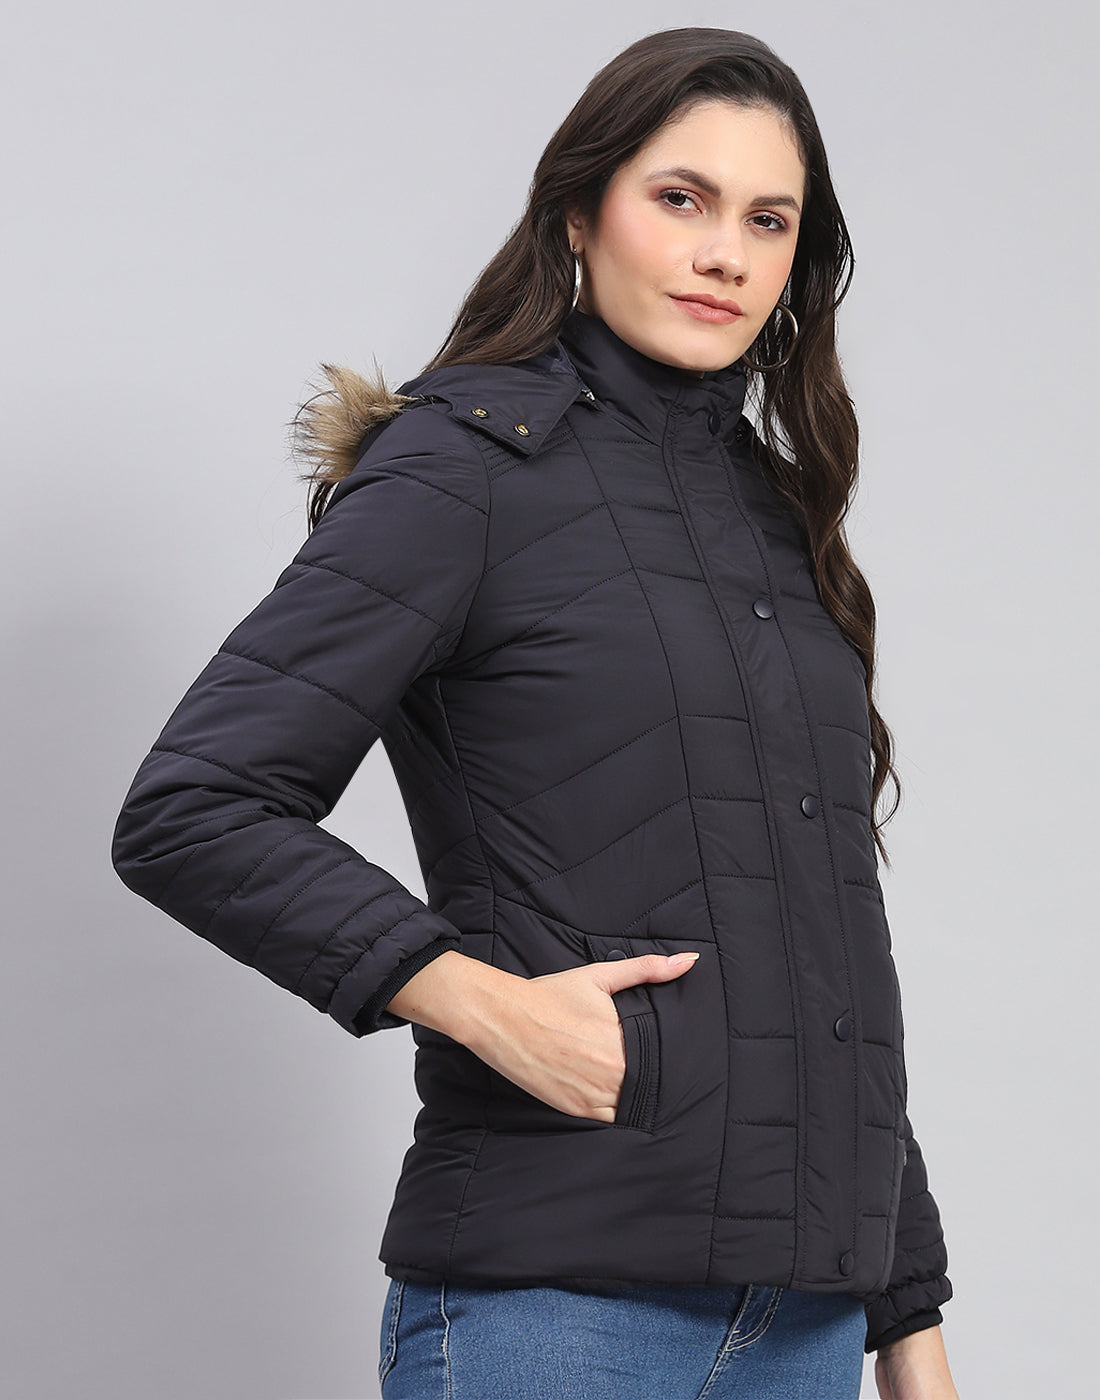 Women Navy Blue Solid Stand Collar Full Sleeve Jacket